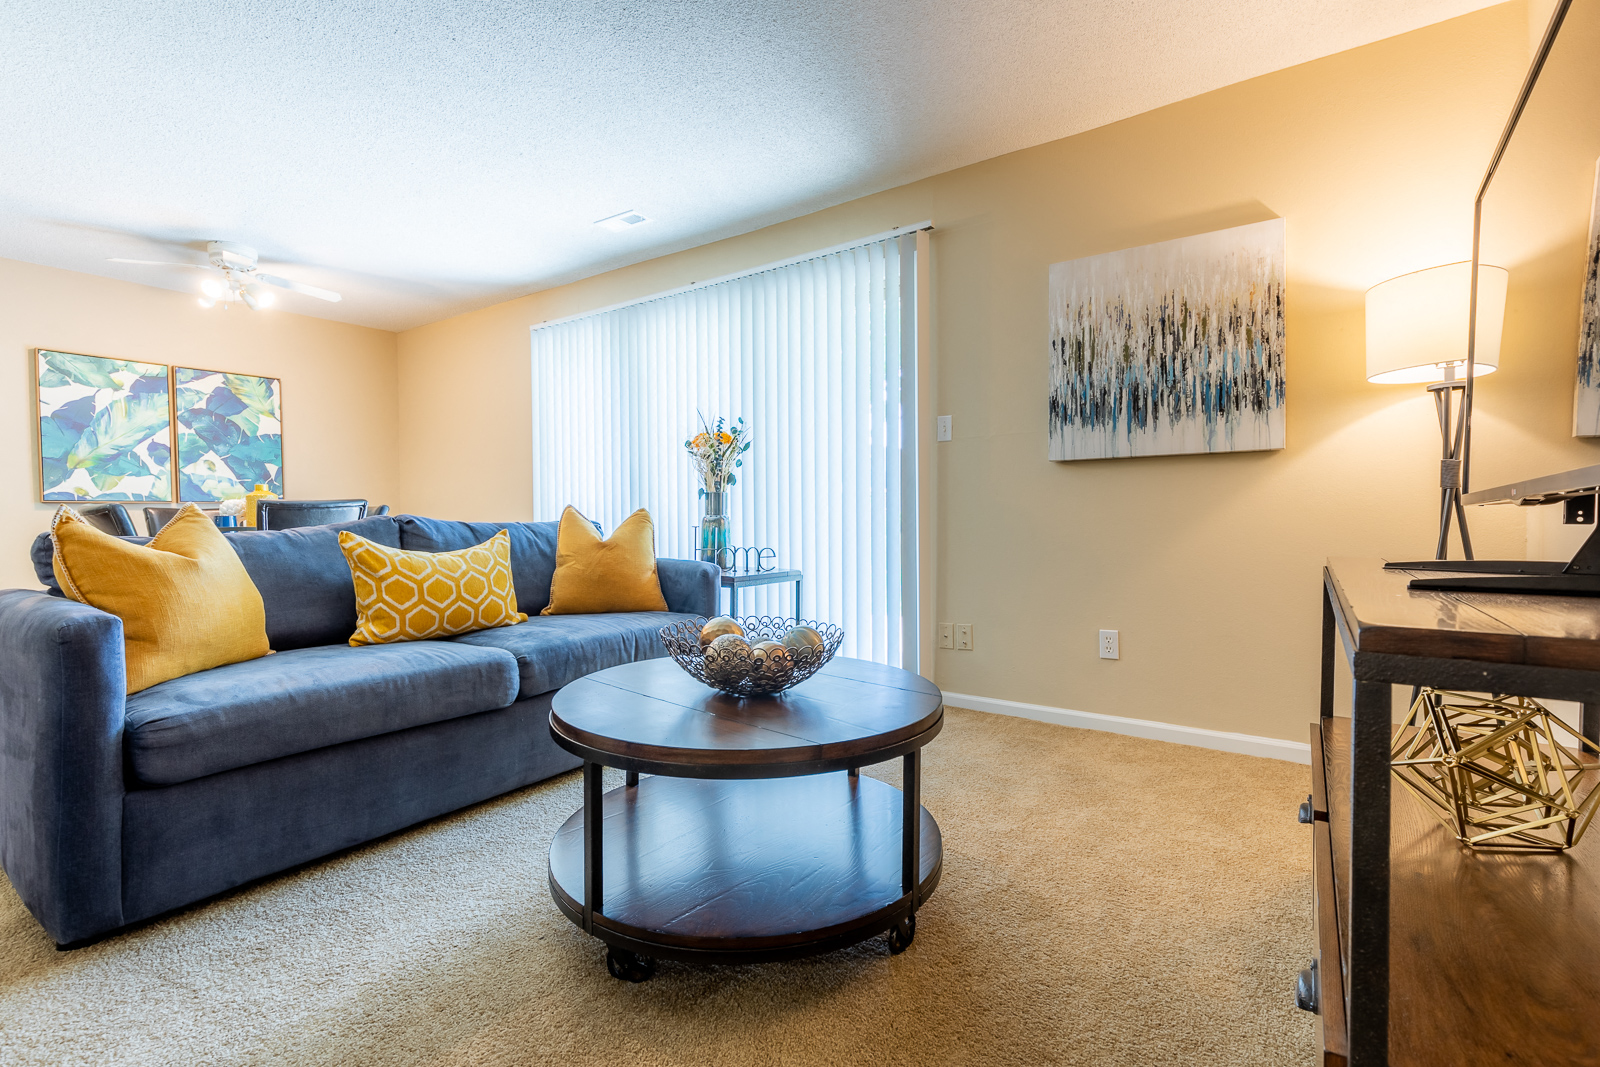 Living room with blue couch1 at Preston Court Apartments, Kansas, 66212